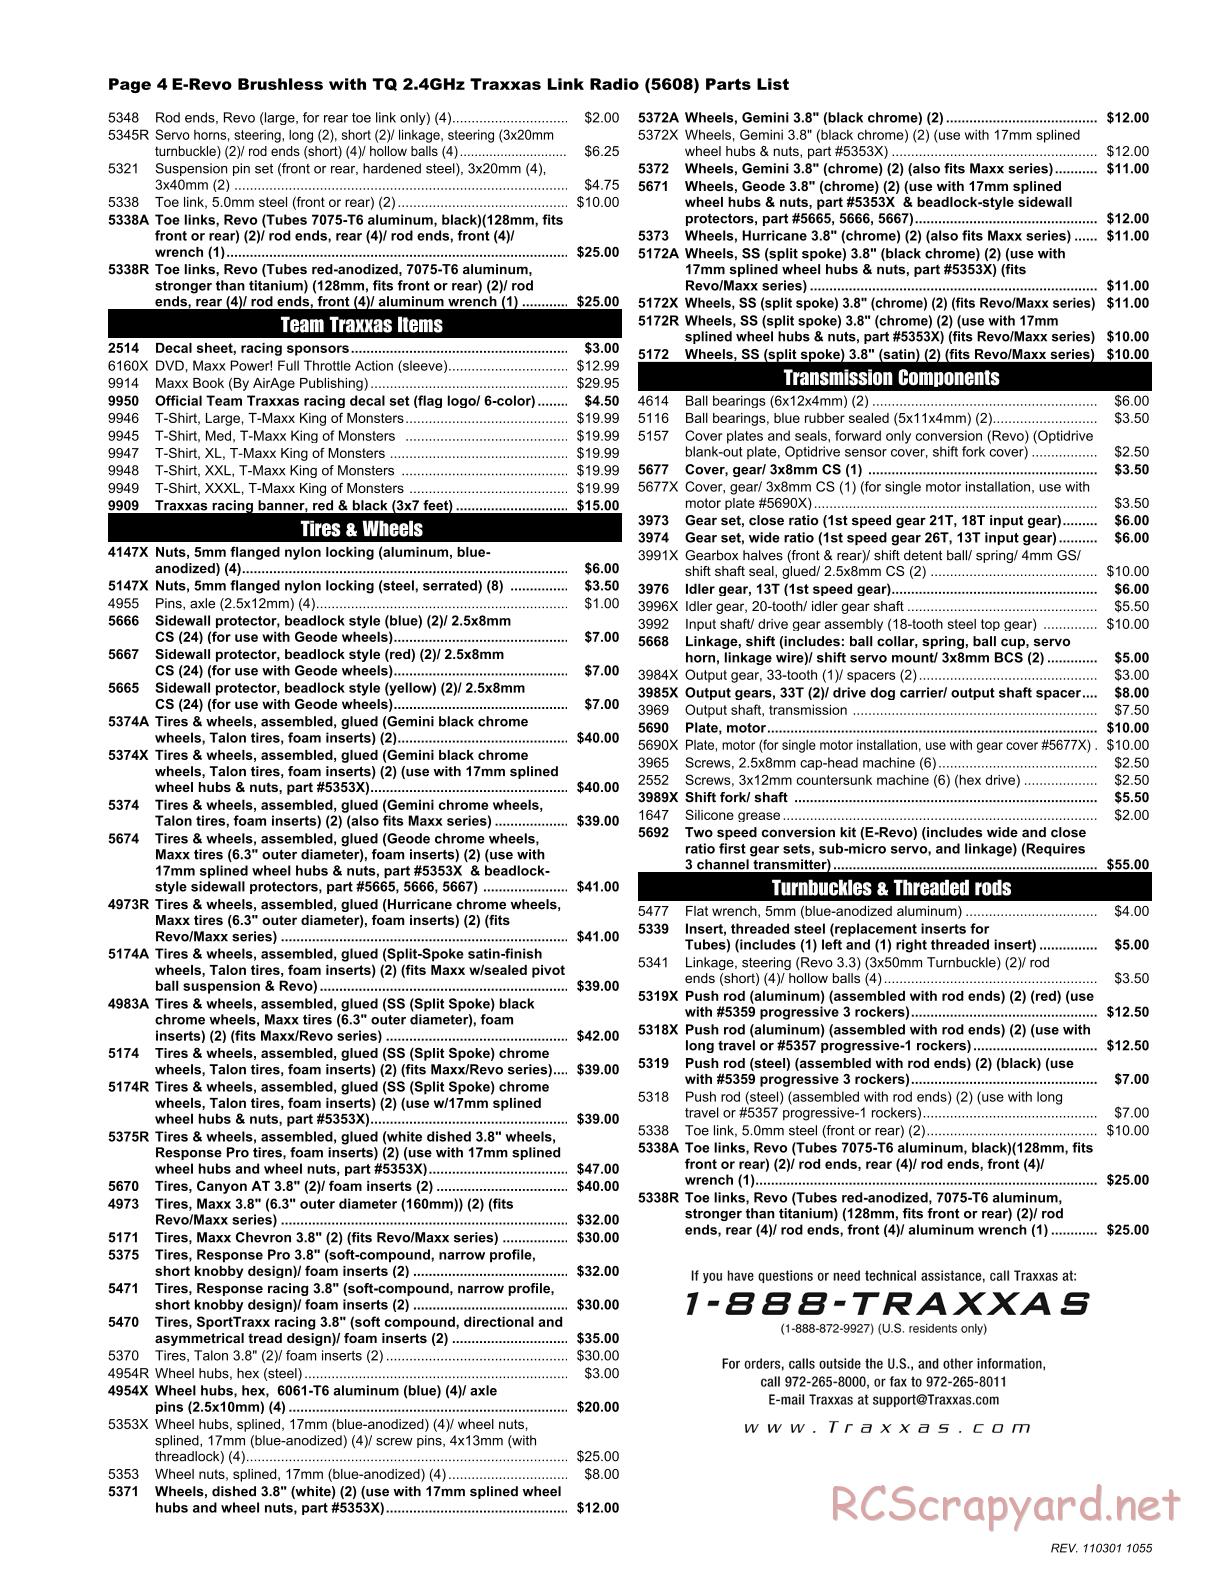 Traxxas - E-Revo Brushless (2009) - Parts List - Page 4